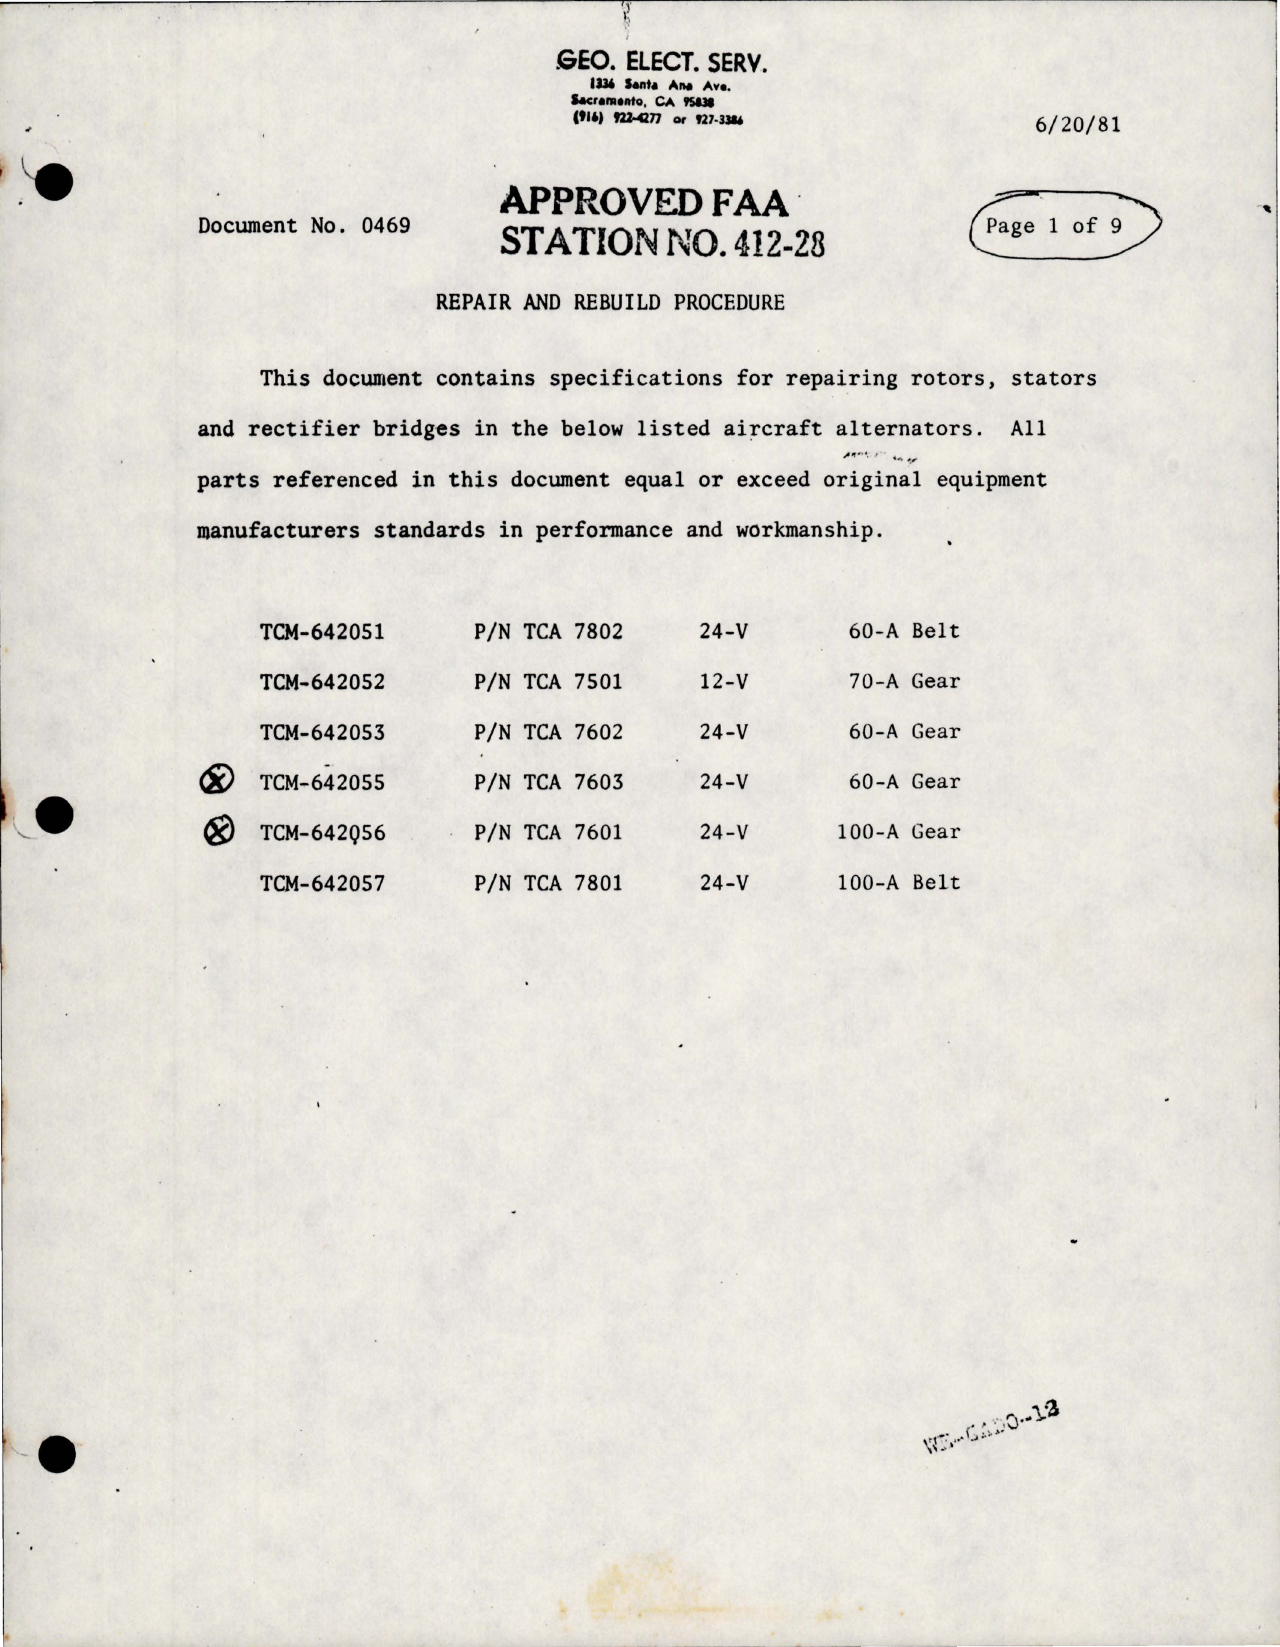 Sample page 1 from AirCorps Library document: Repair and Rebuild Procedure for Rotors, Stators and Rectifier Bridges